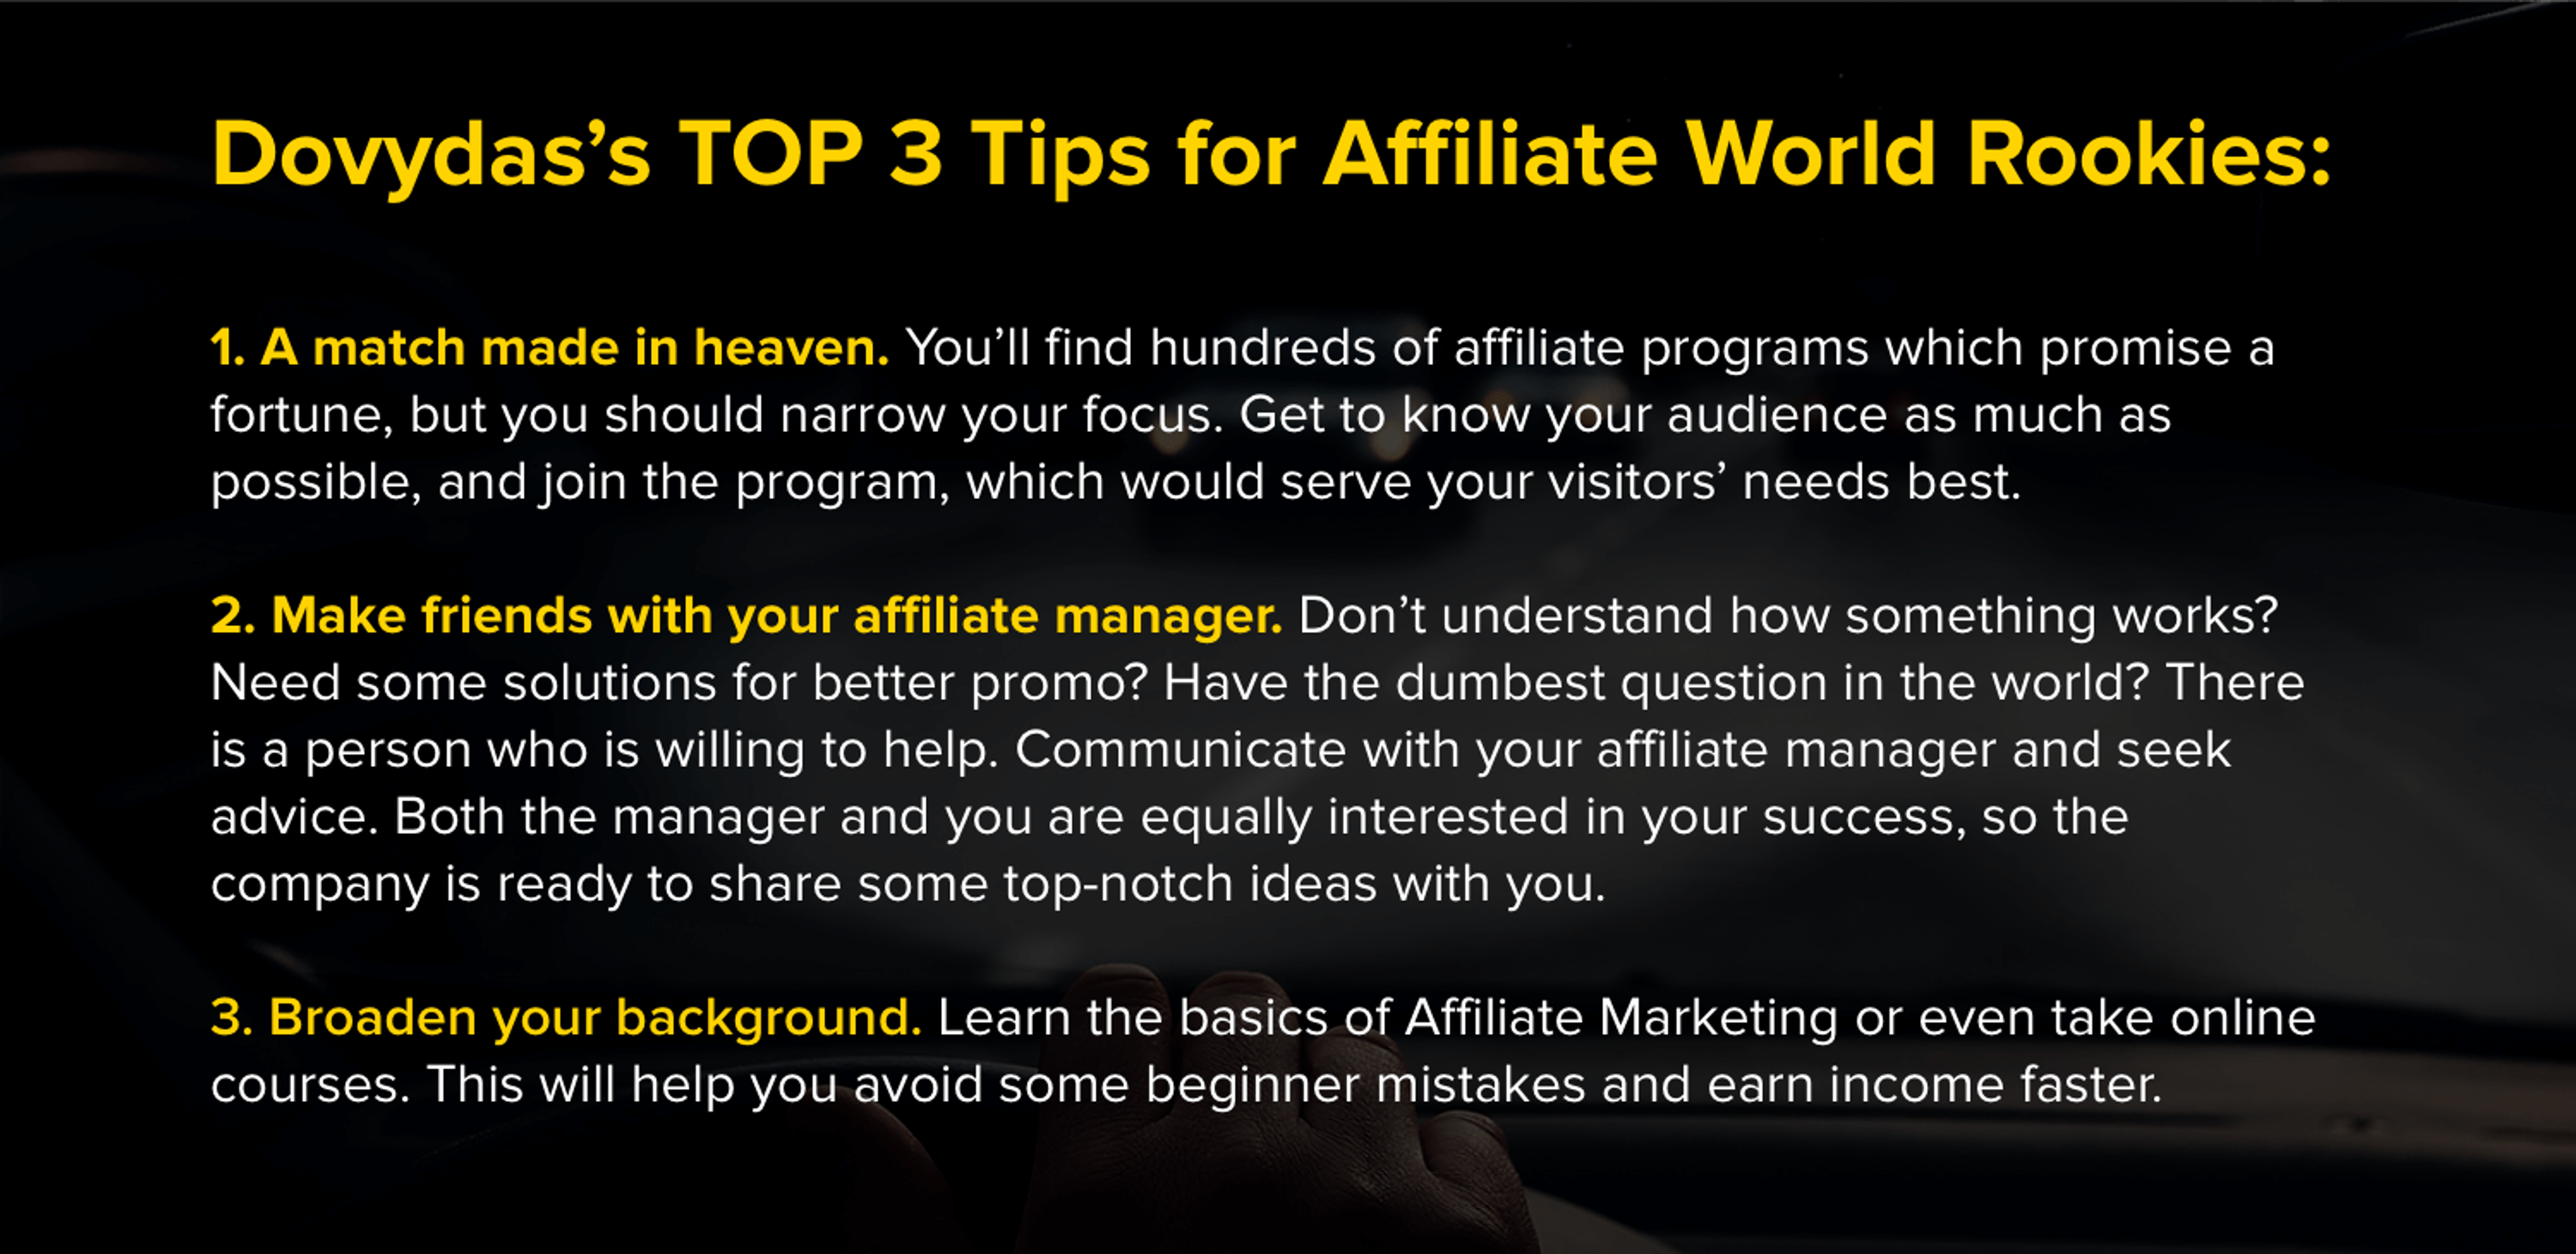 tips for affiliate world rookies